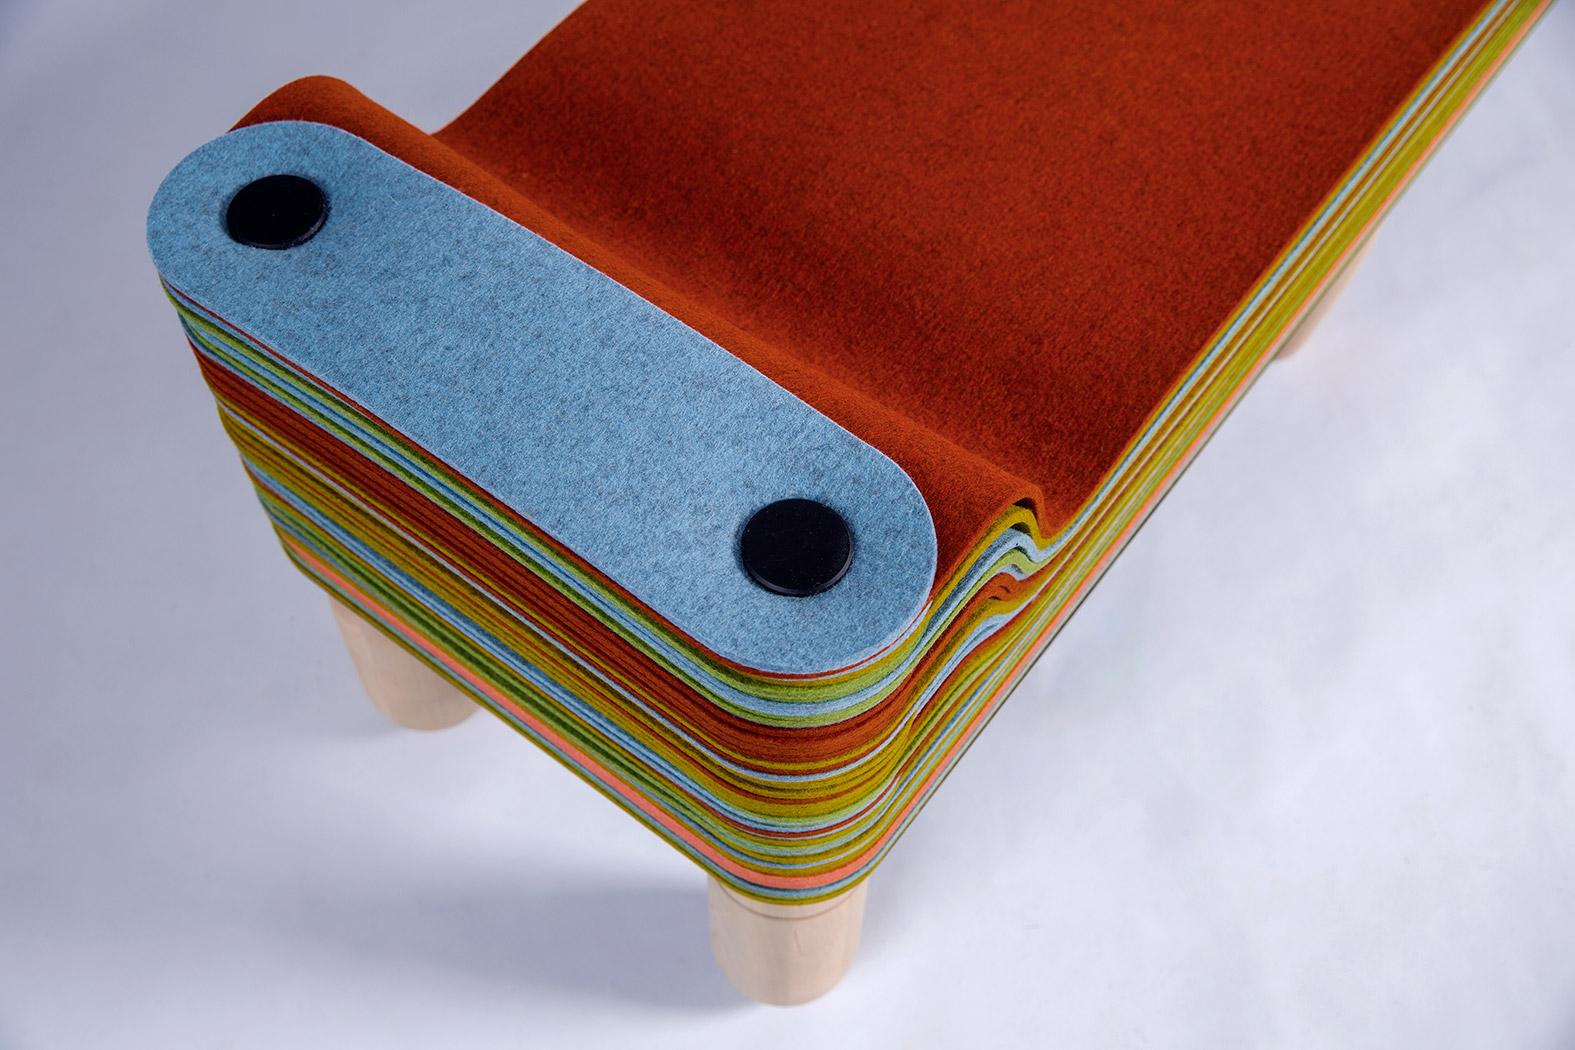 Maxine B, Felt and Wood Bench, Benoist F. Drut in STACKABL, Canada, 2021 For Sale 4